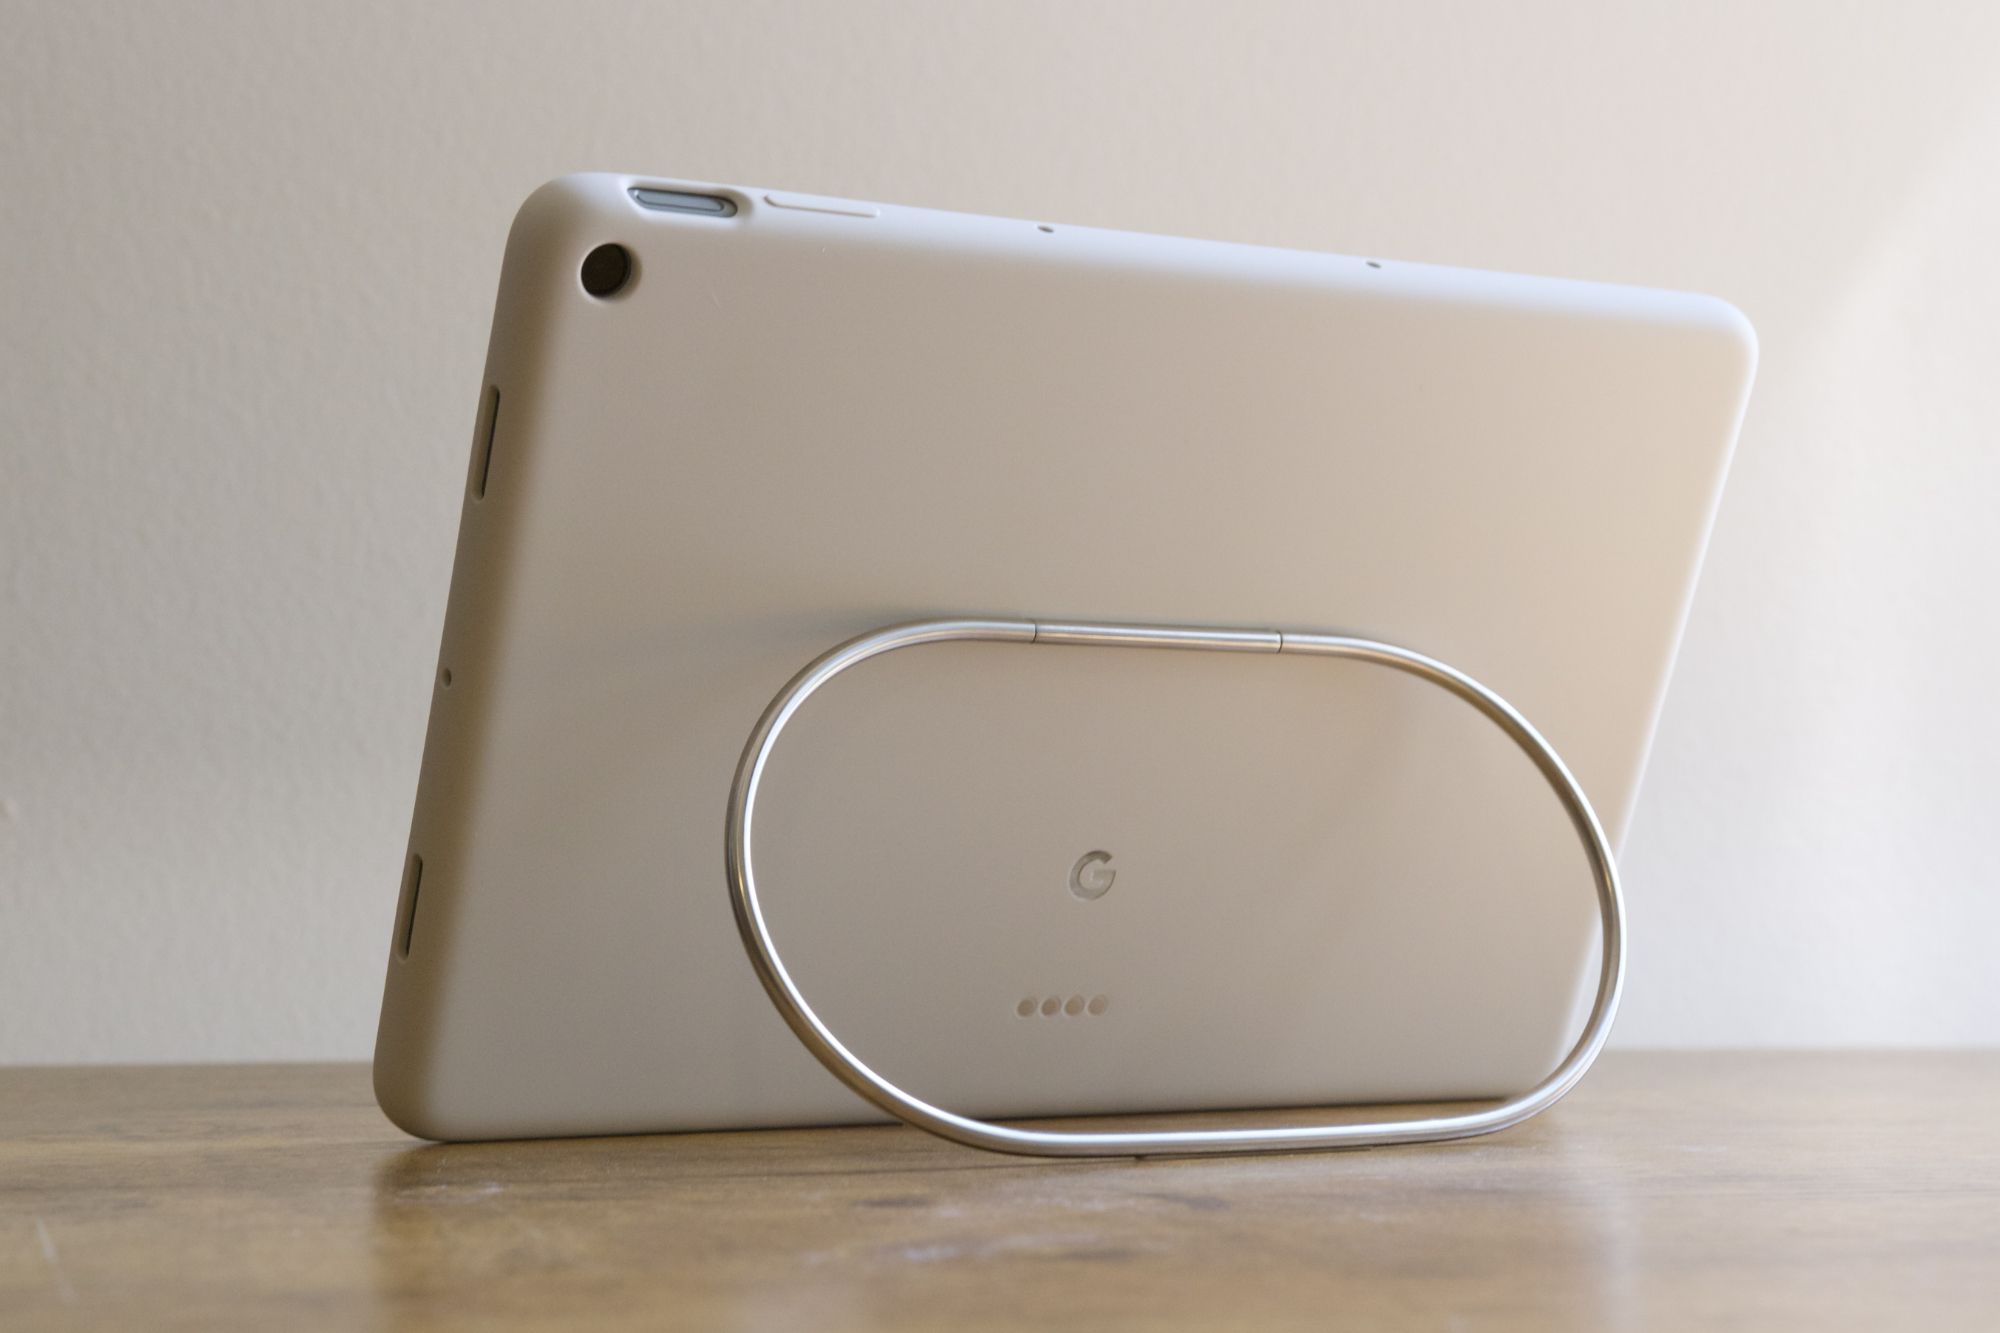 The Google Pixel Tablet being propped up on a desk with its official case.